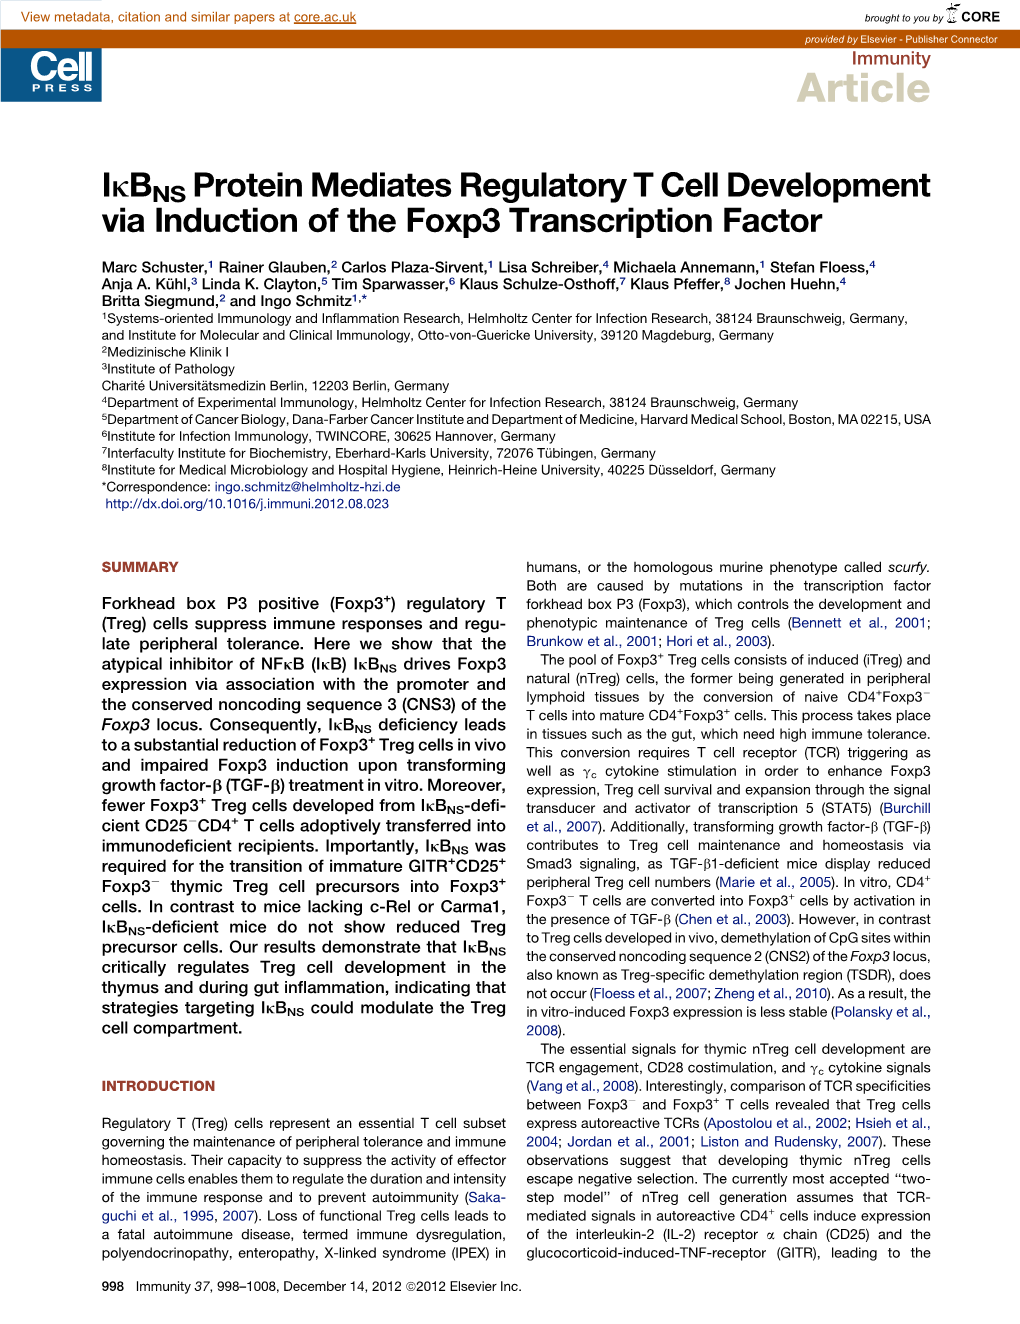 BNS Protein Mediates Regulatory T Cell Development Via Induction of the Foxp3 Transcription Factor